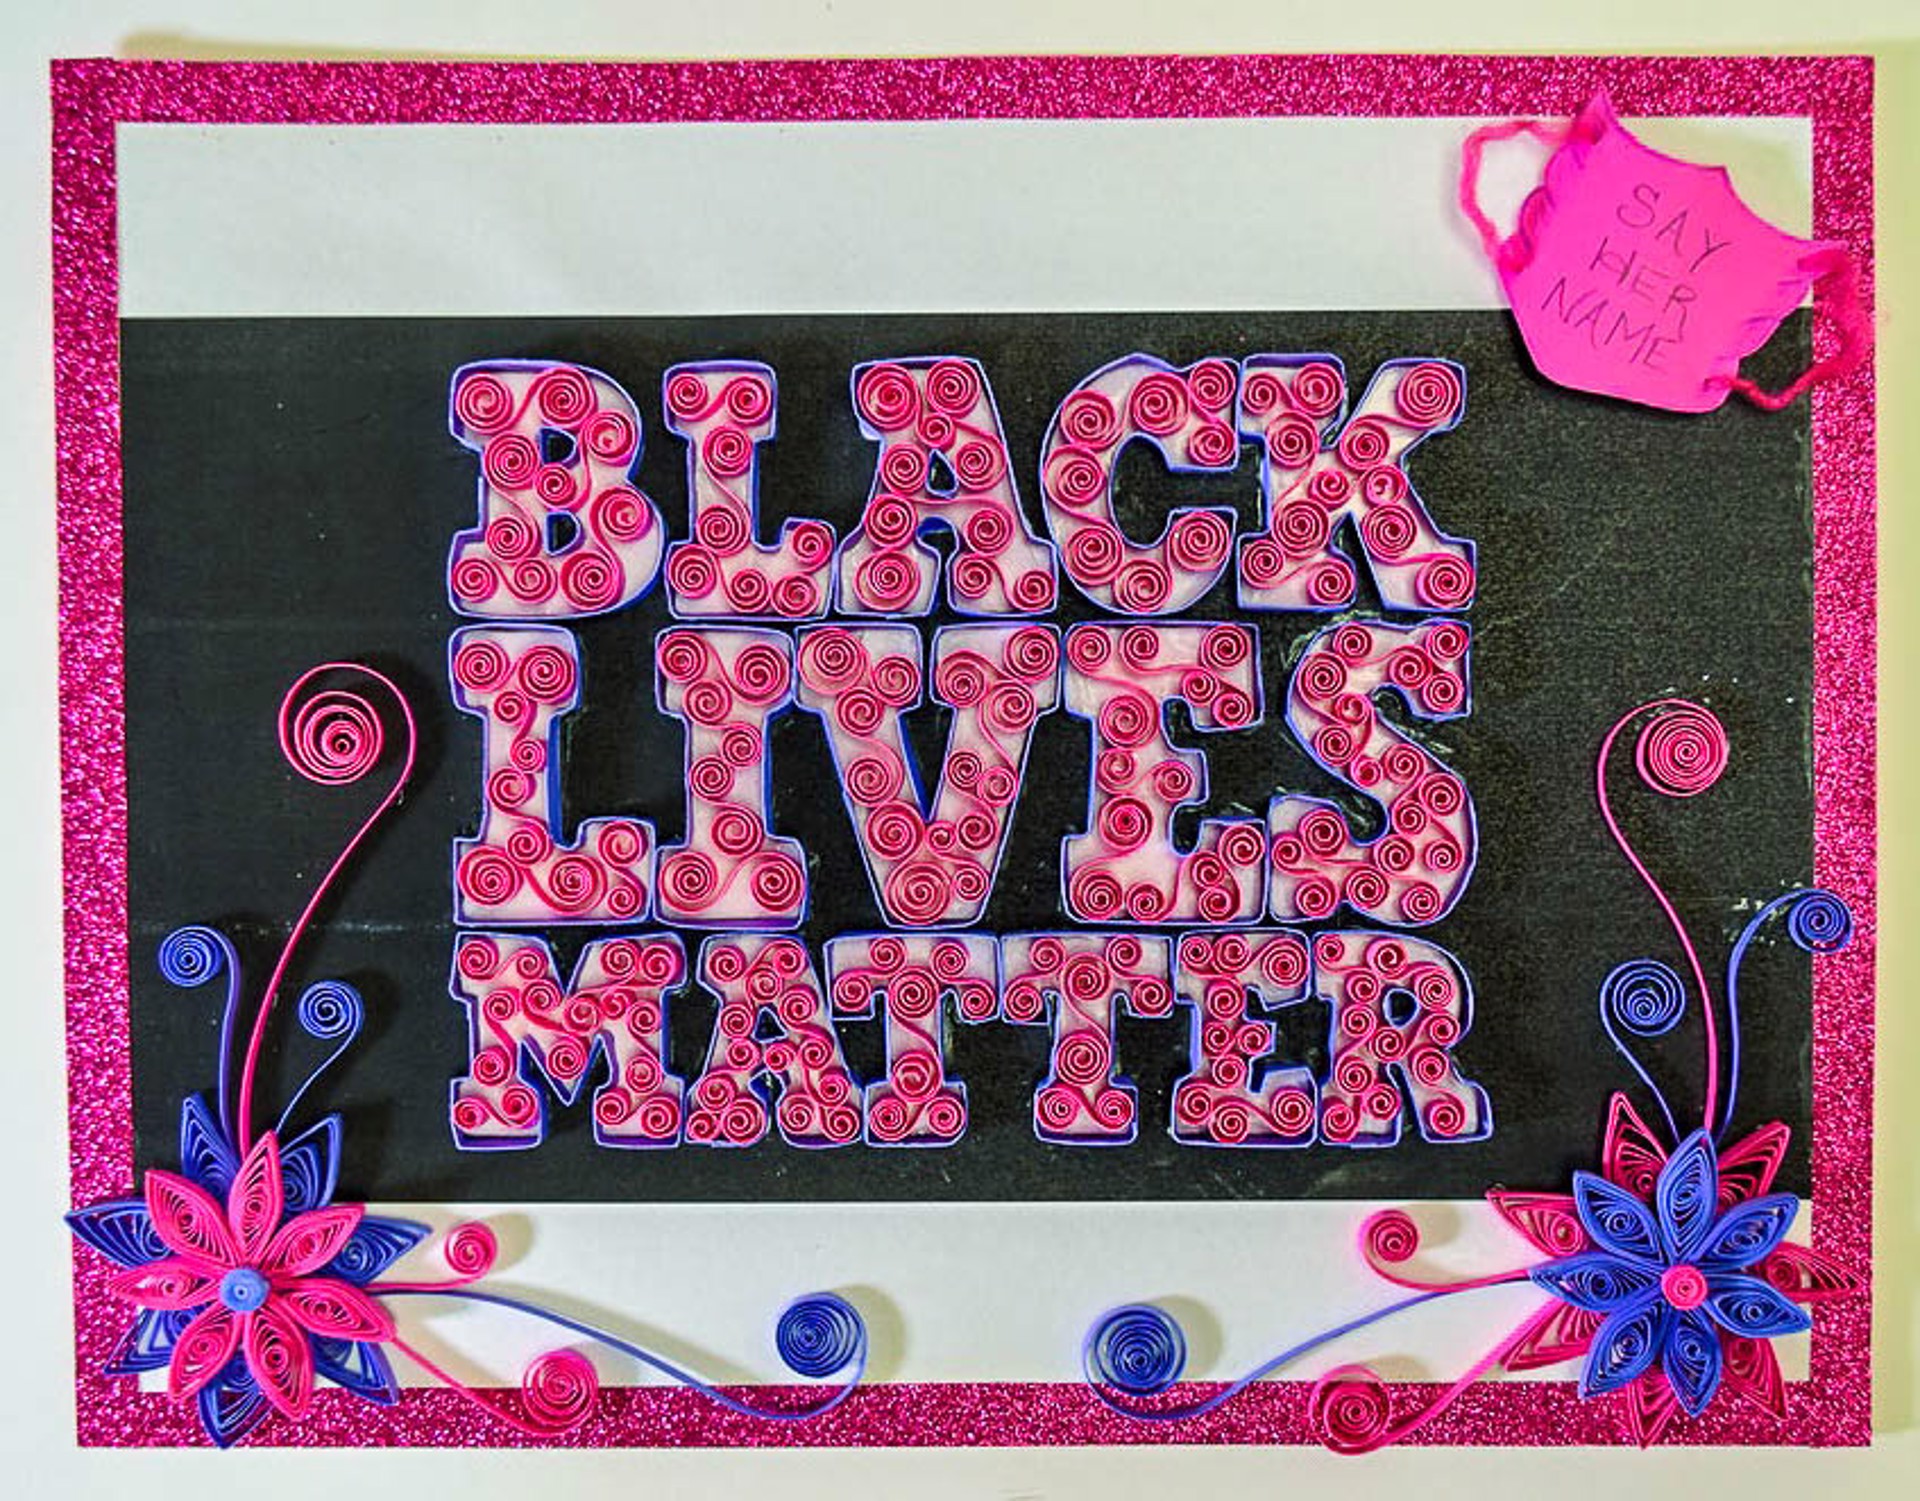 Black Lives Matter – In Memory of Breonna Taylor by Curryswanson